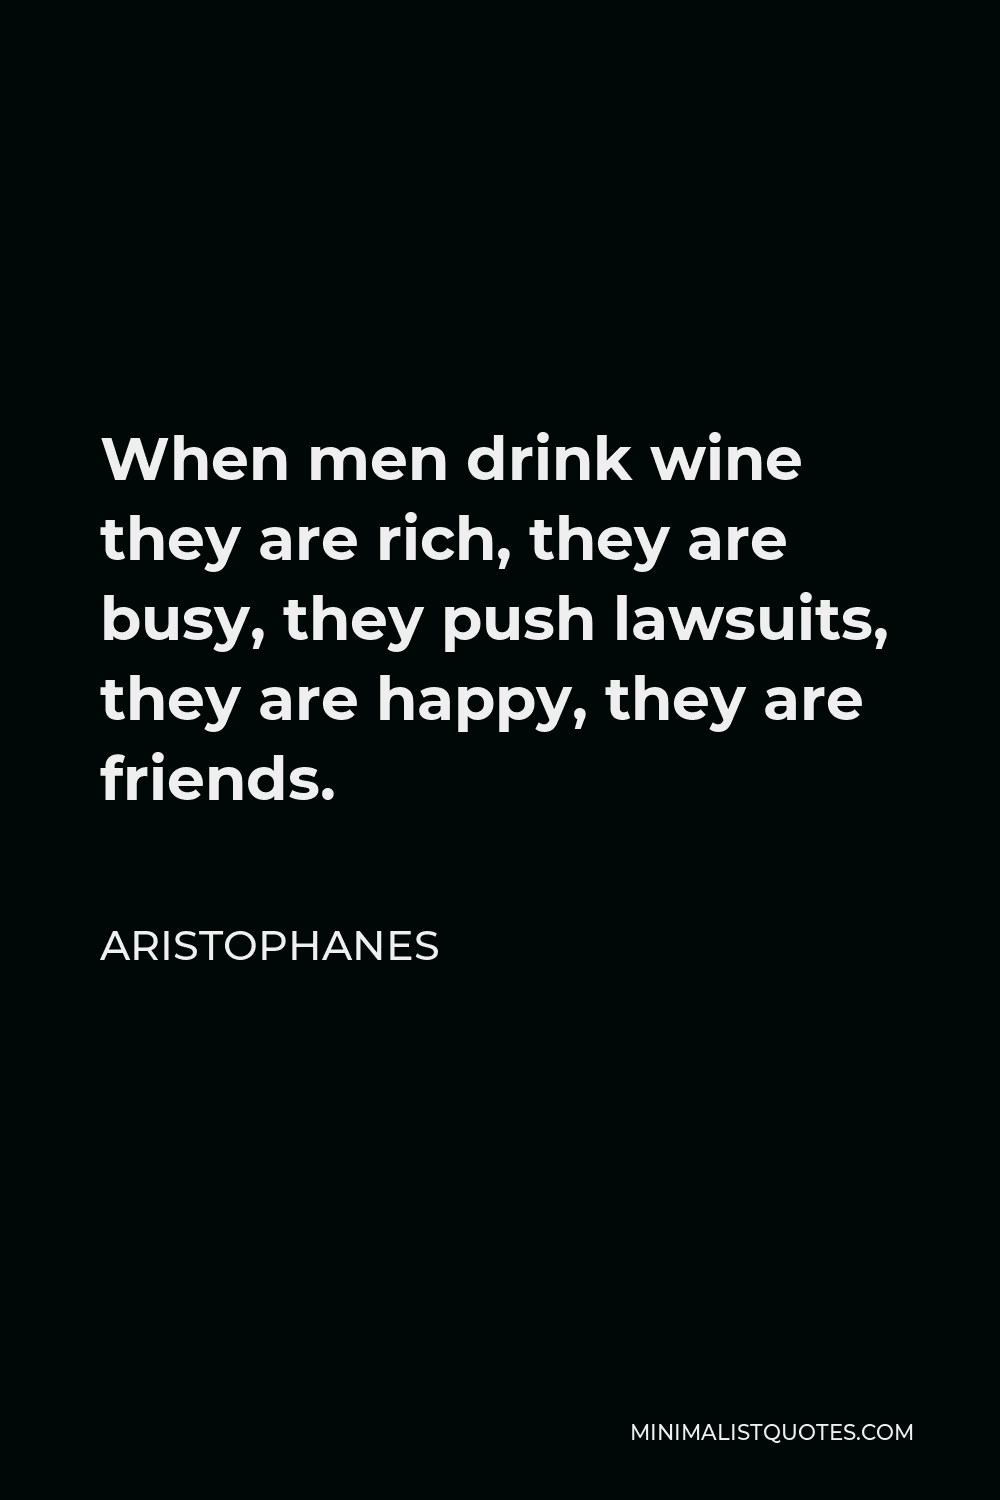 Aristophanes Quote - When men drink wine they are rich, they are busy, they push lawsuits, they are happy, they are friends.